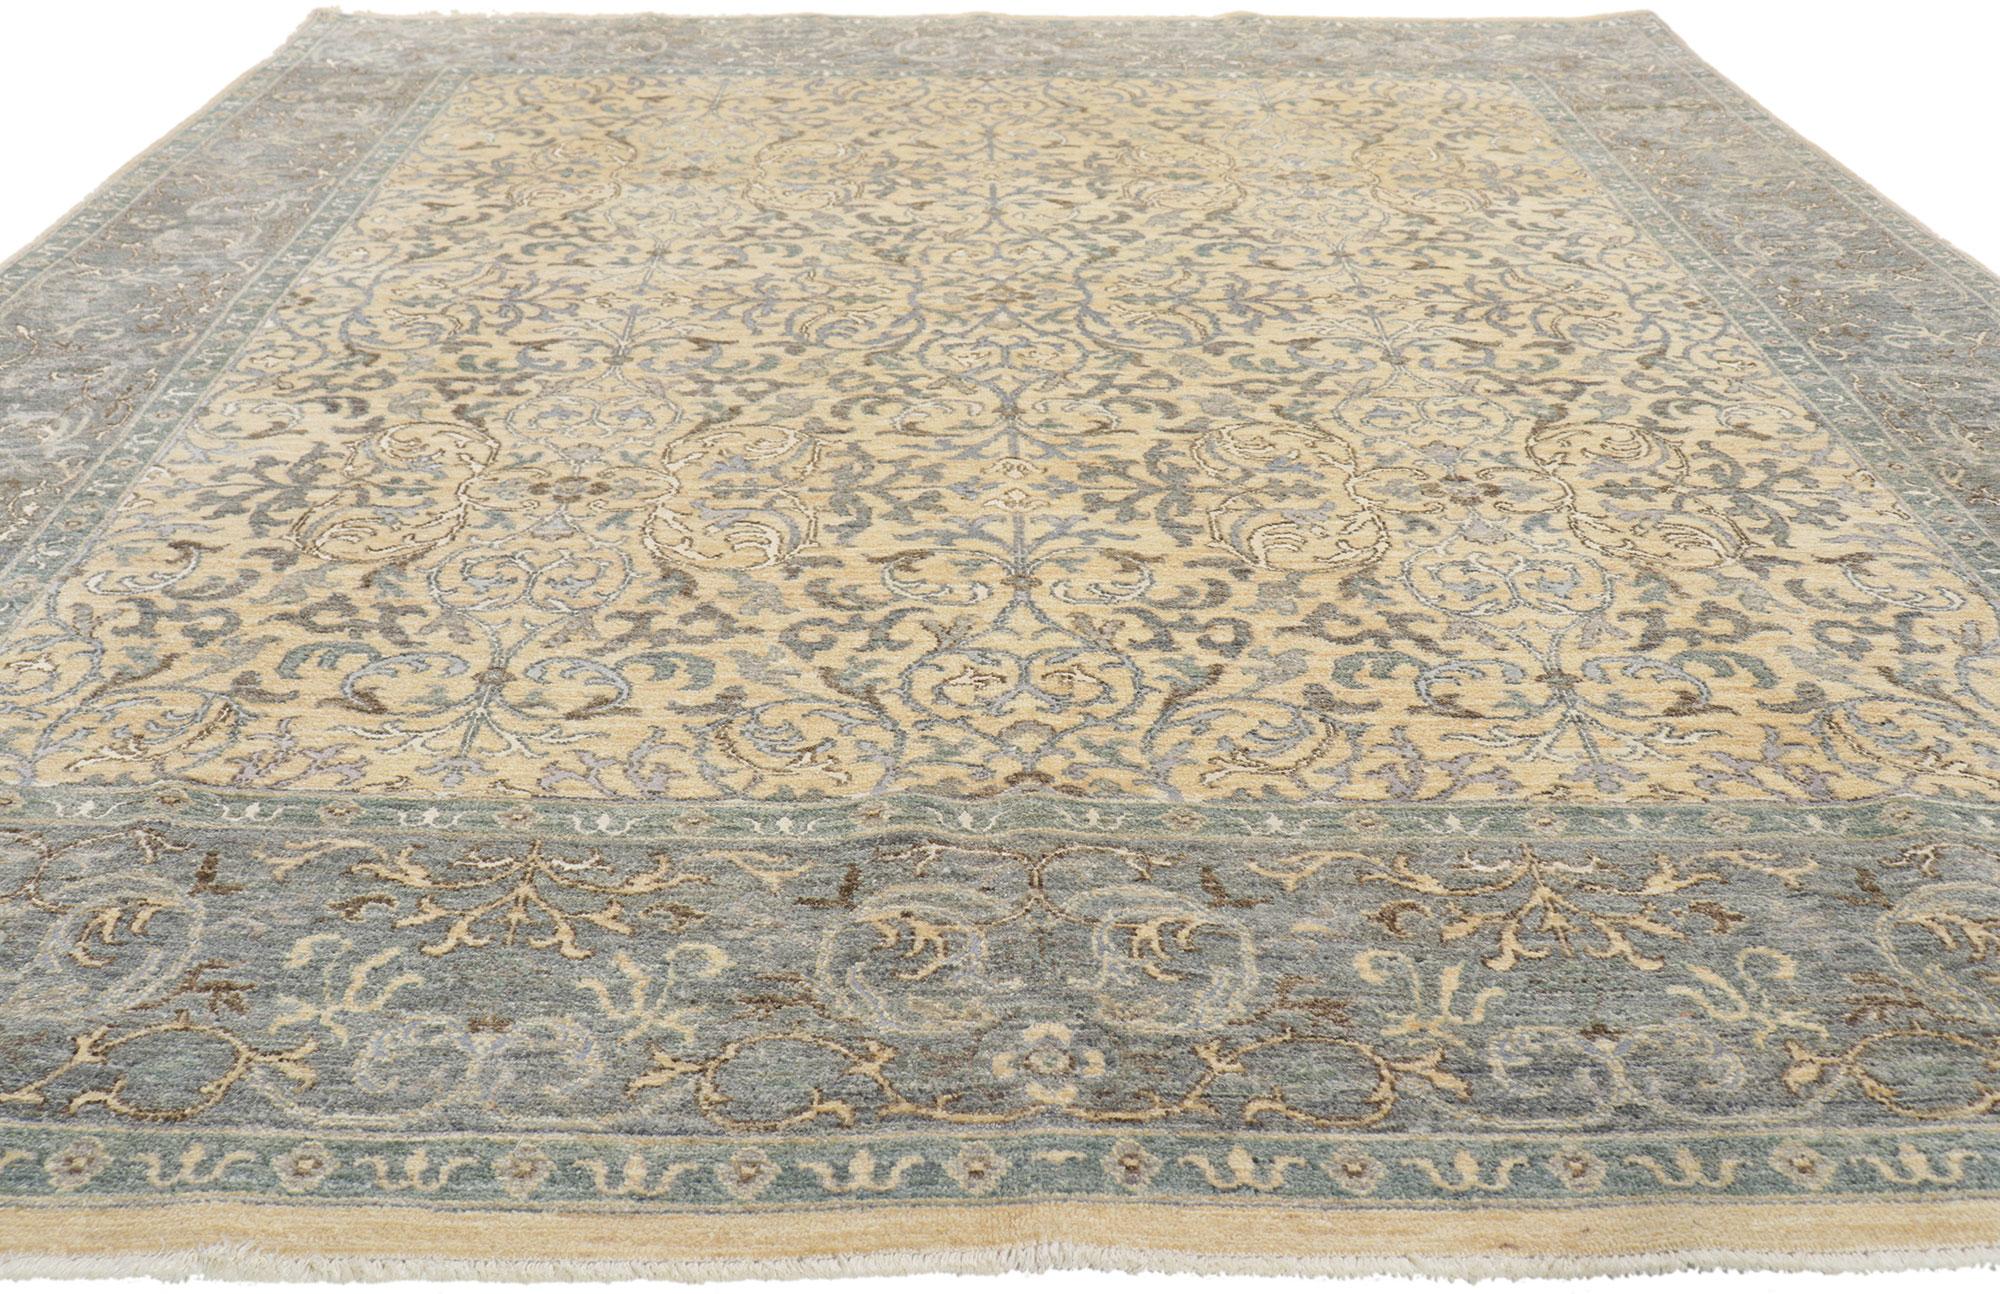 Renaissance New Transitional Damask Scroll Rug with Soft Earth-Tone Colors For Sale